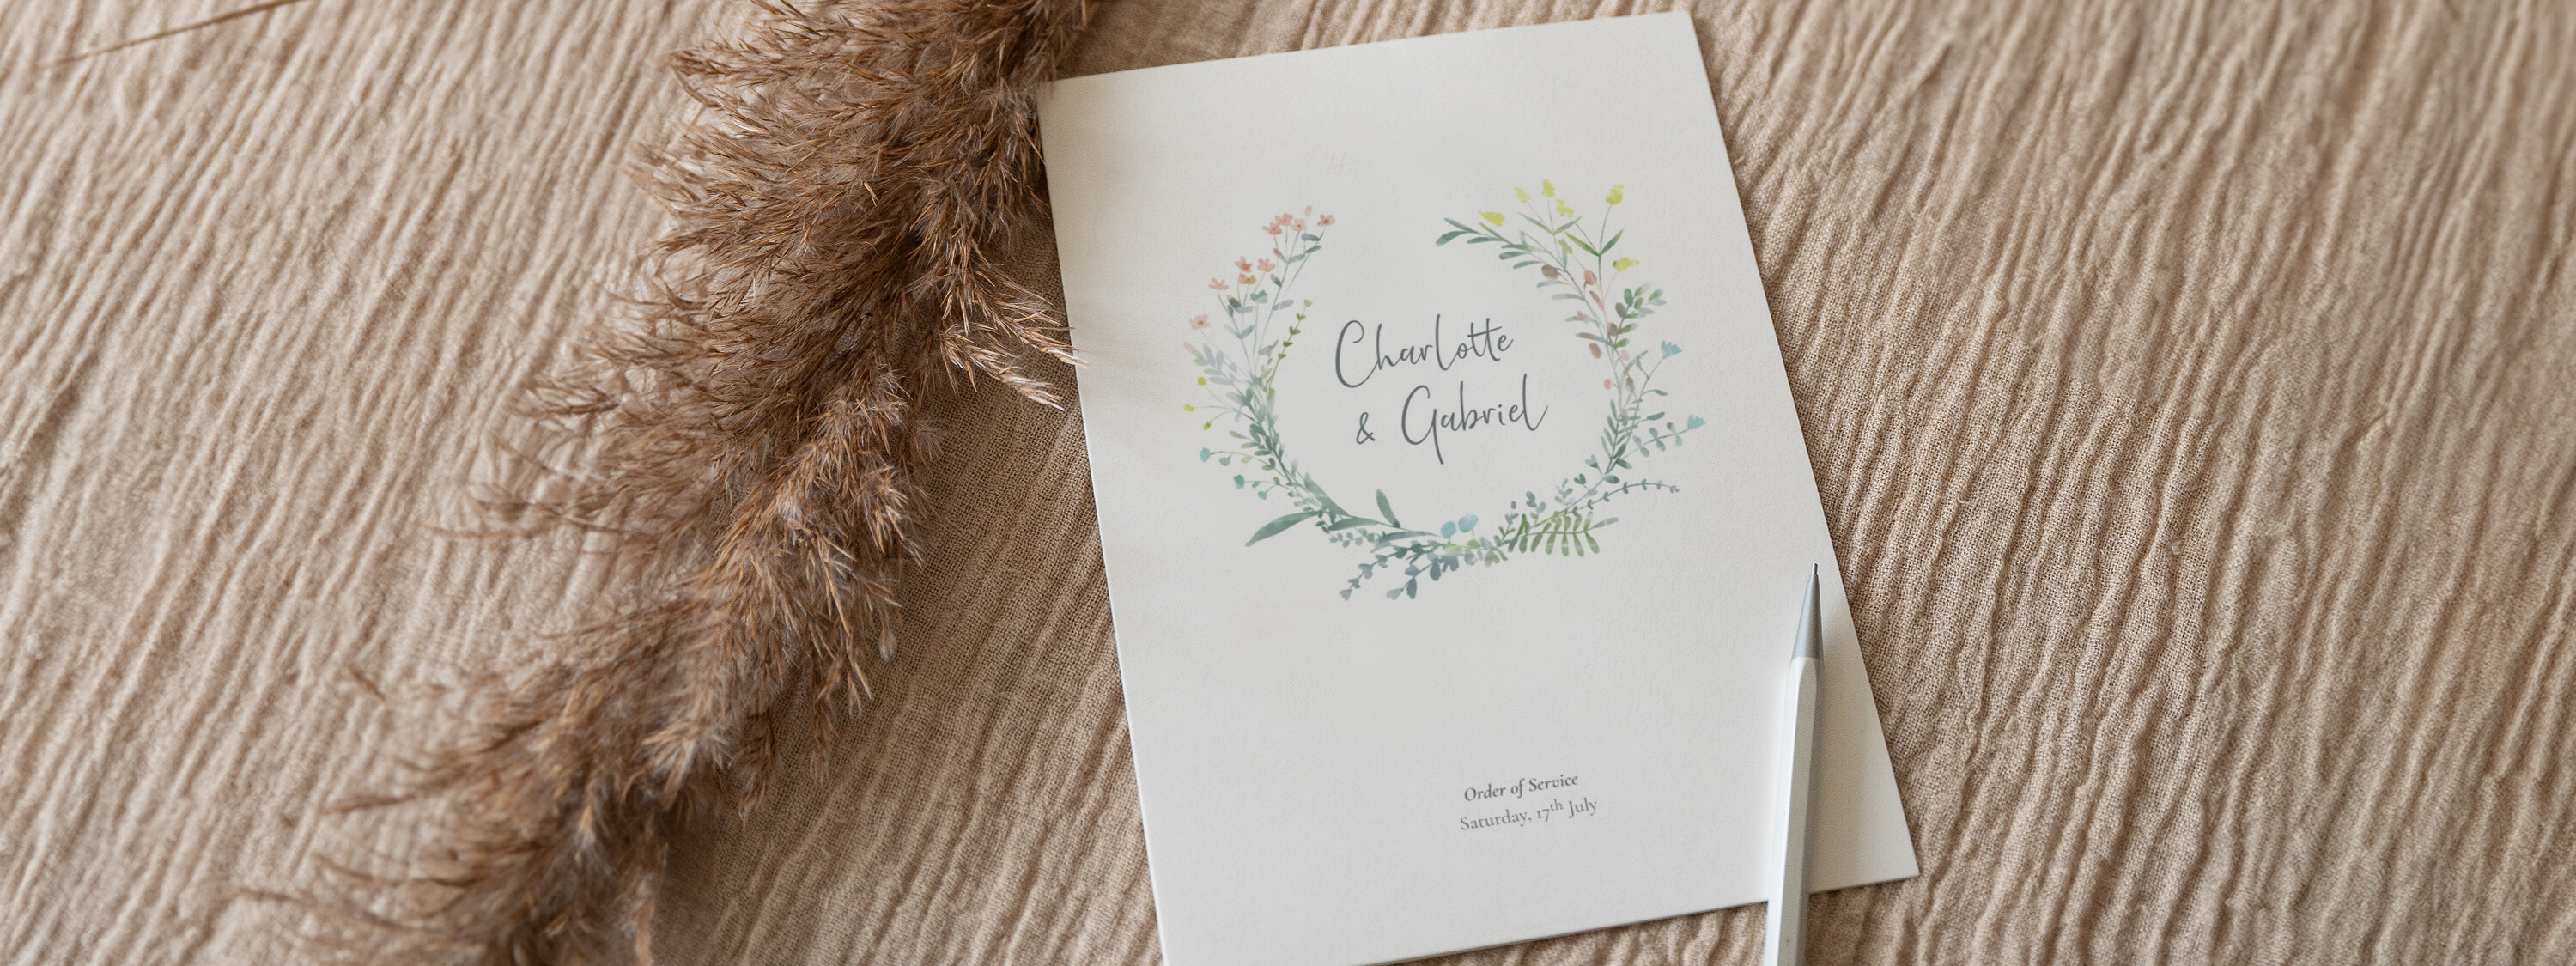 Traditional Wedding Order of Service Booklet Covers